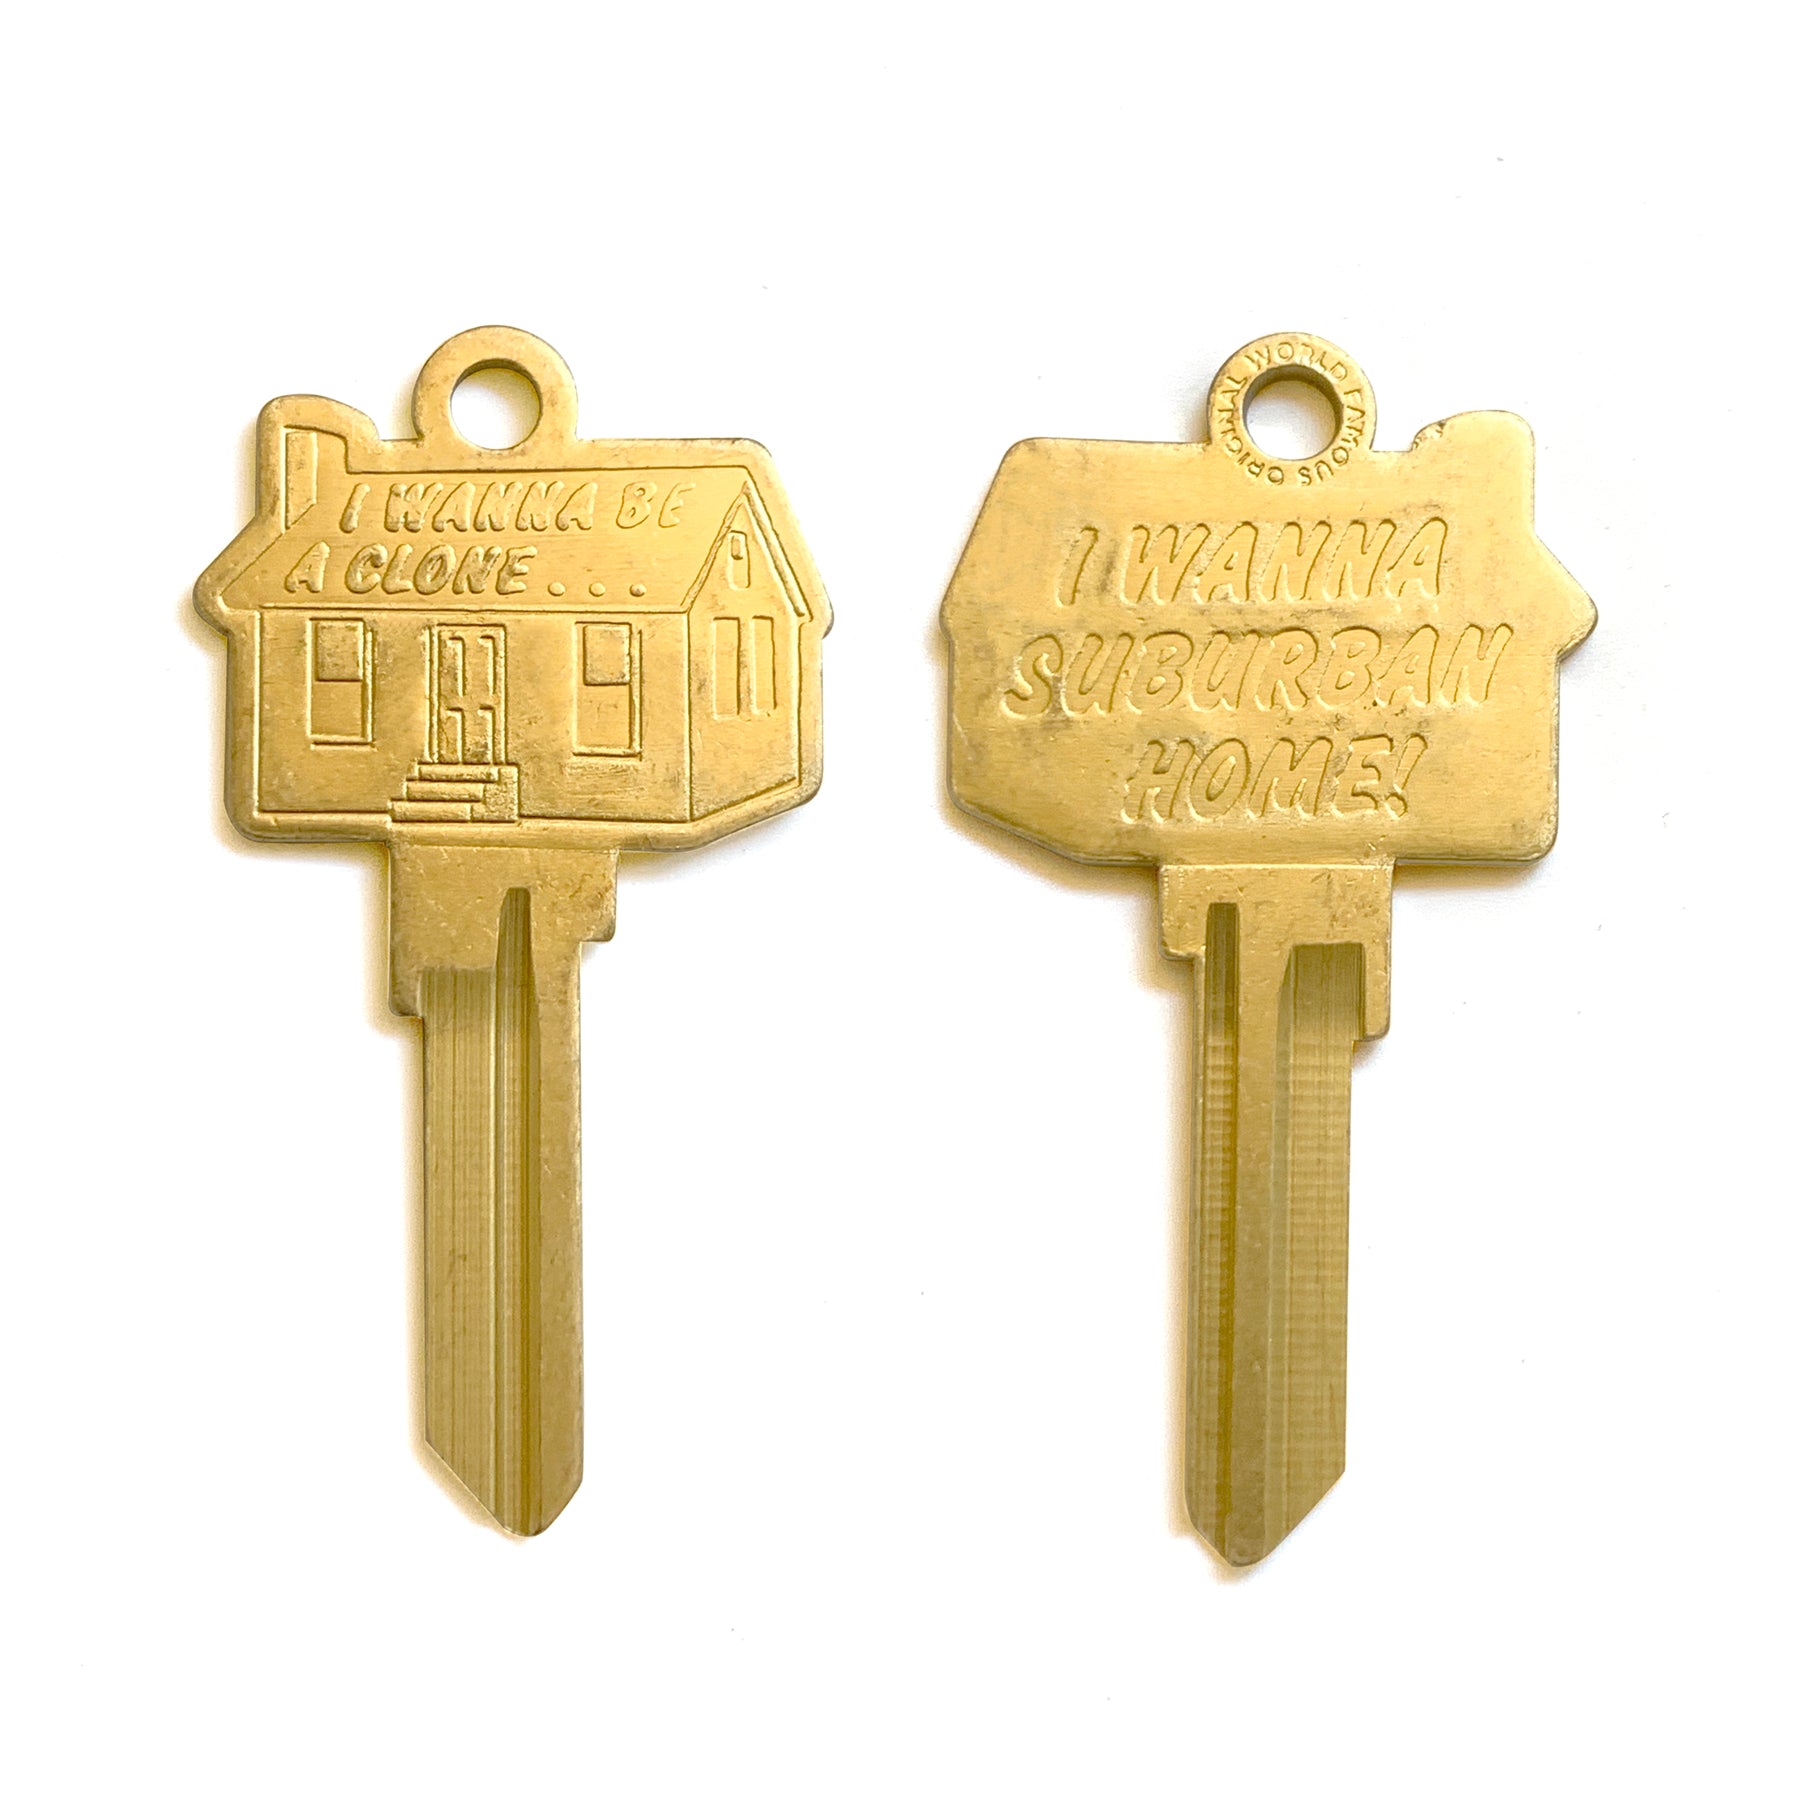 Are House Keys About to Become Obselete?